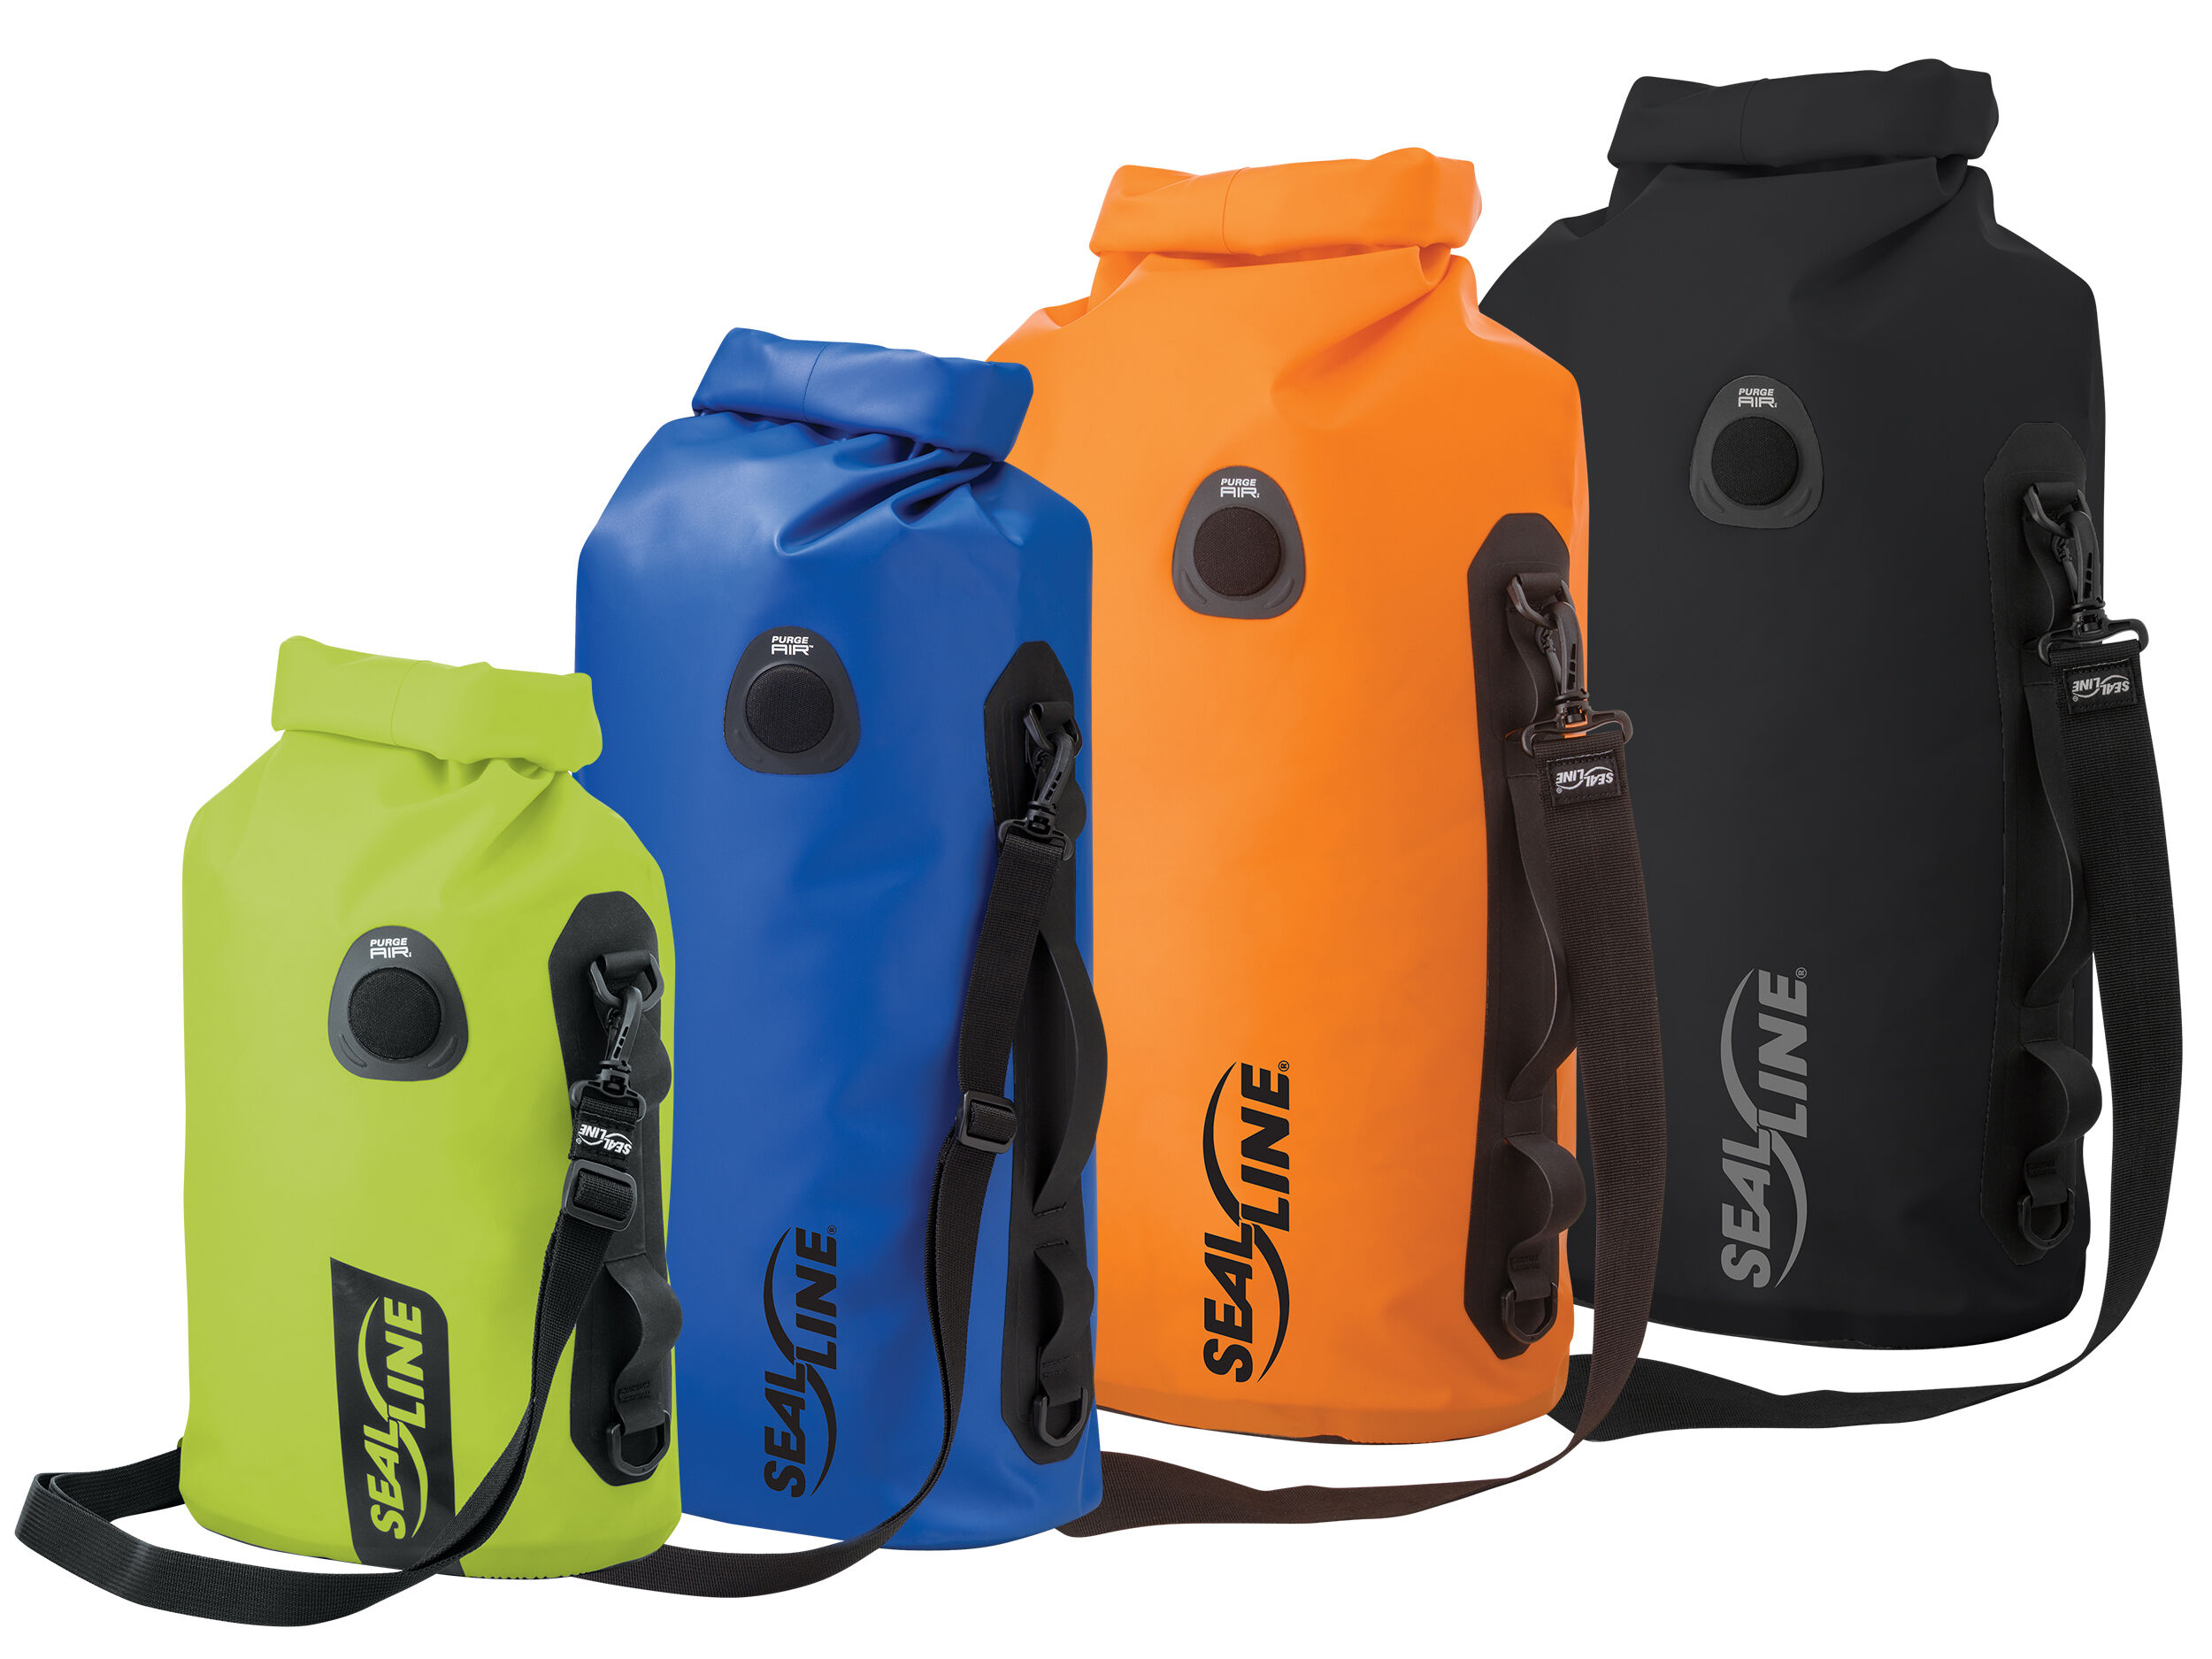 SealLine® gear protection - dry bags, backpacks, totes, duffles